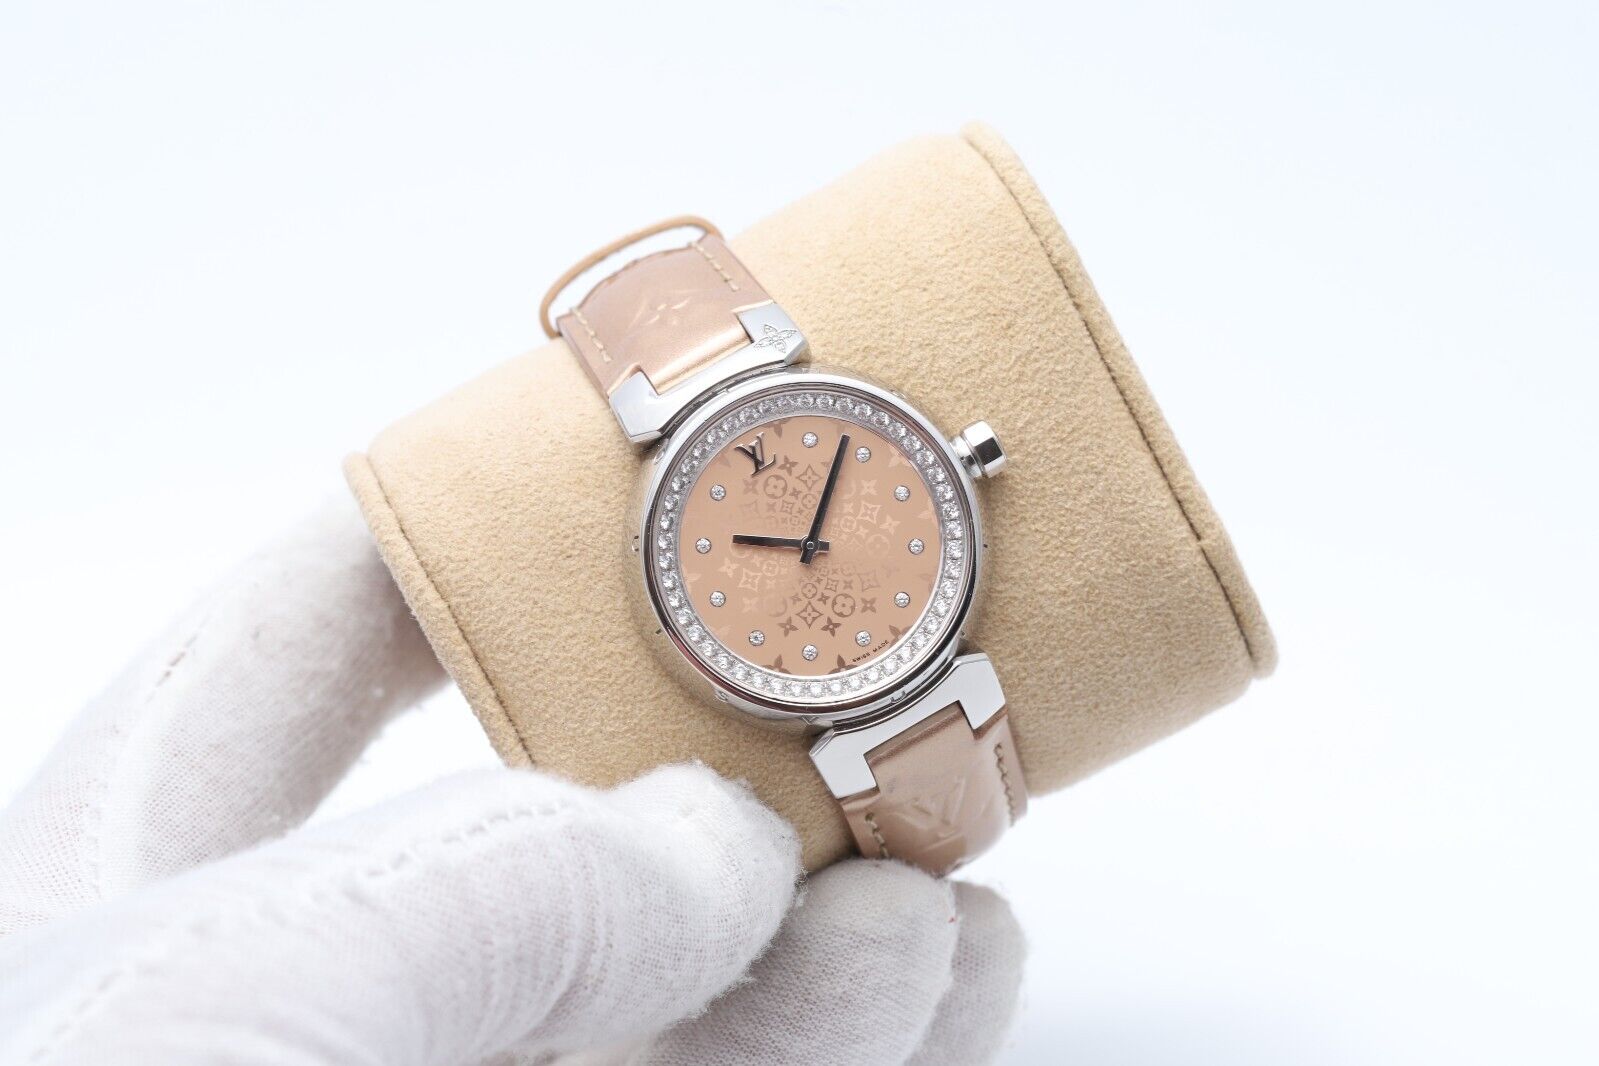 Louis Vuitton Brown Watches for Women